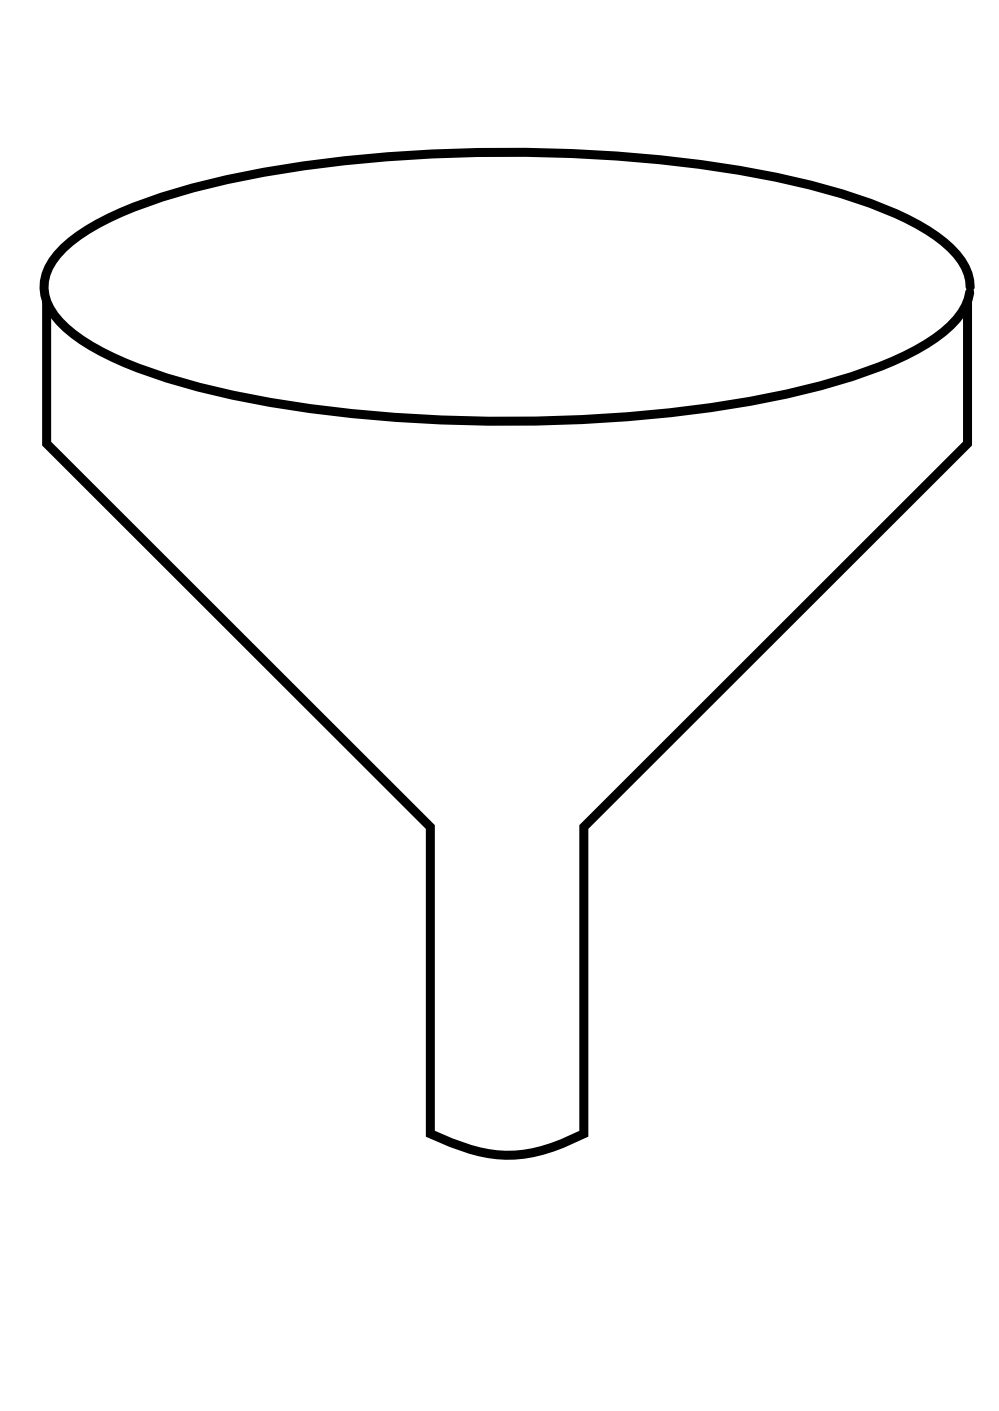 Funnel svg #10, Download drawings